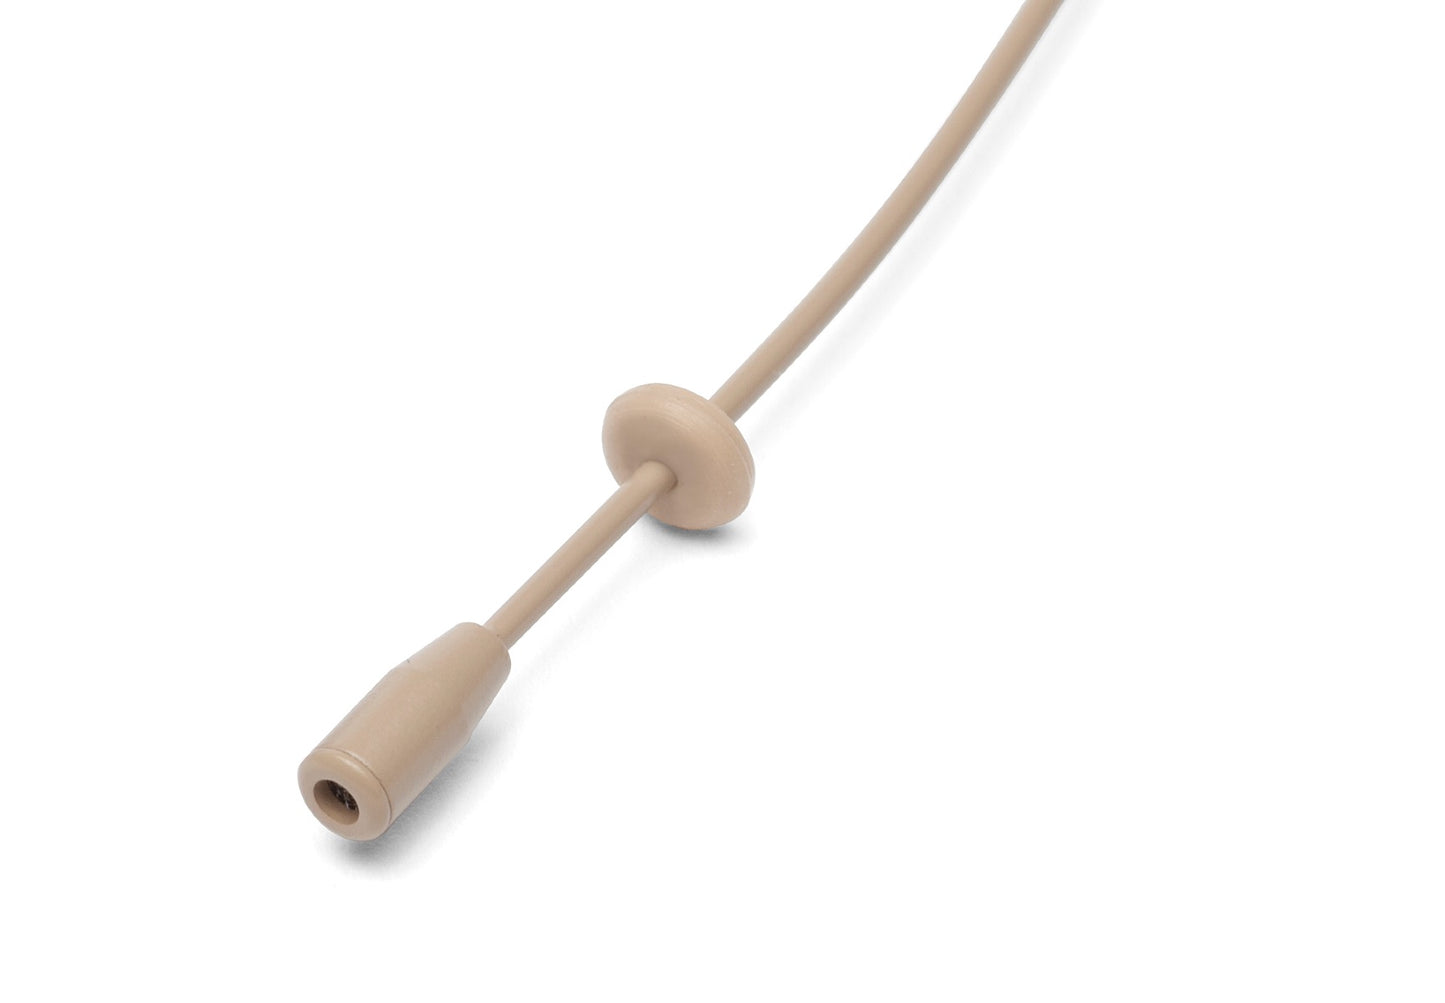 Samson SE50x Earset Microphone for Wireless Systems - Beige